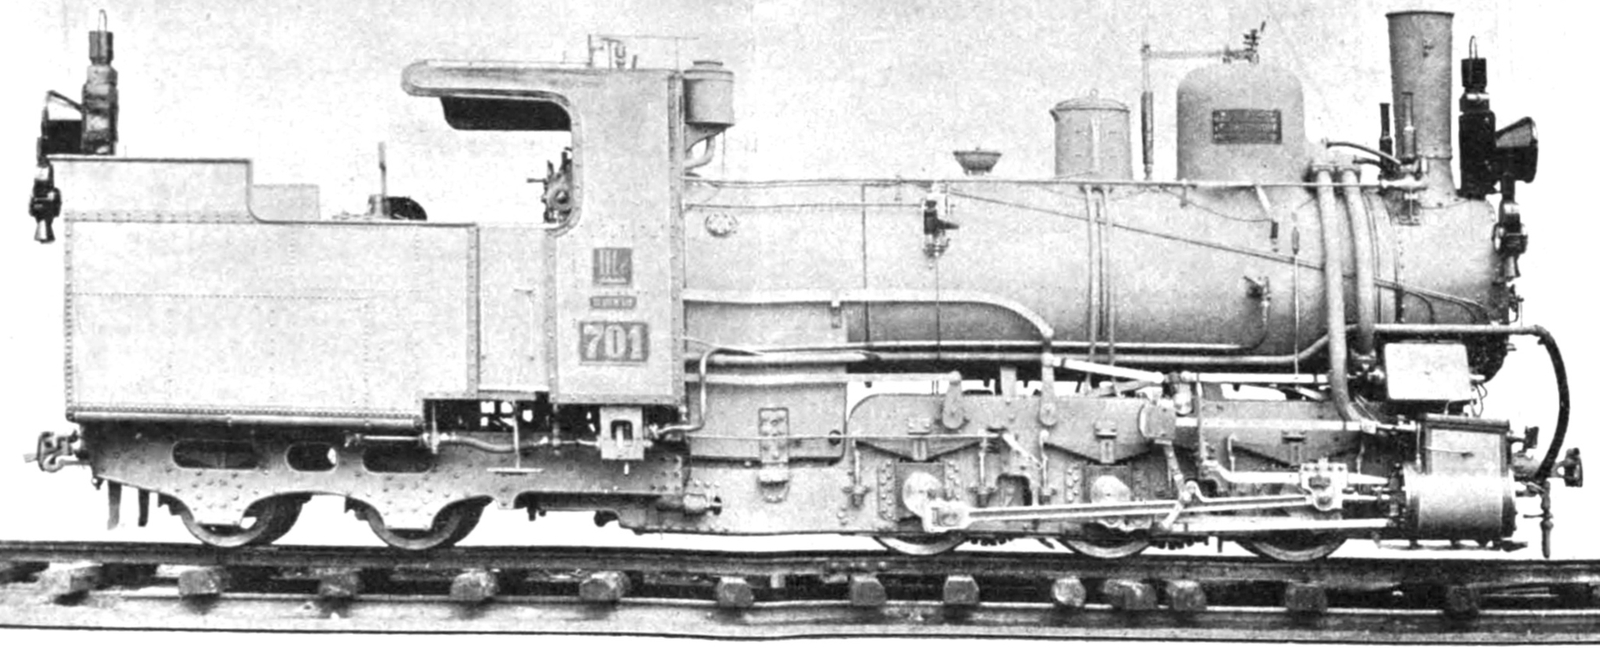 No. 701 on a works photo